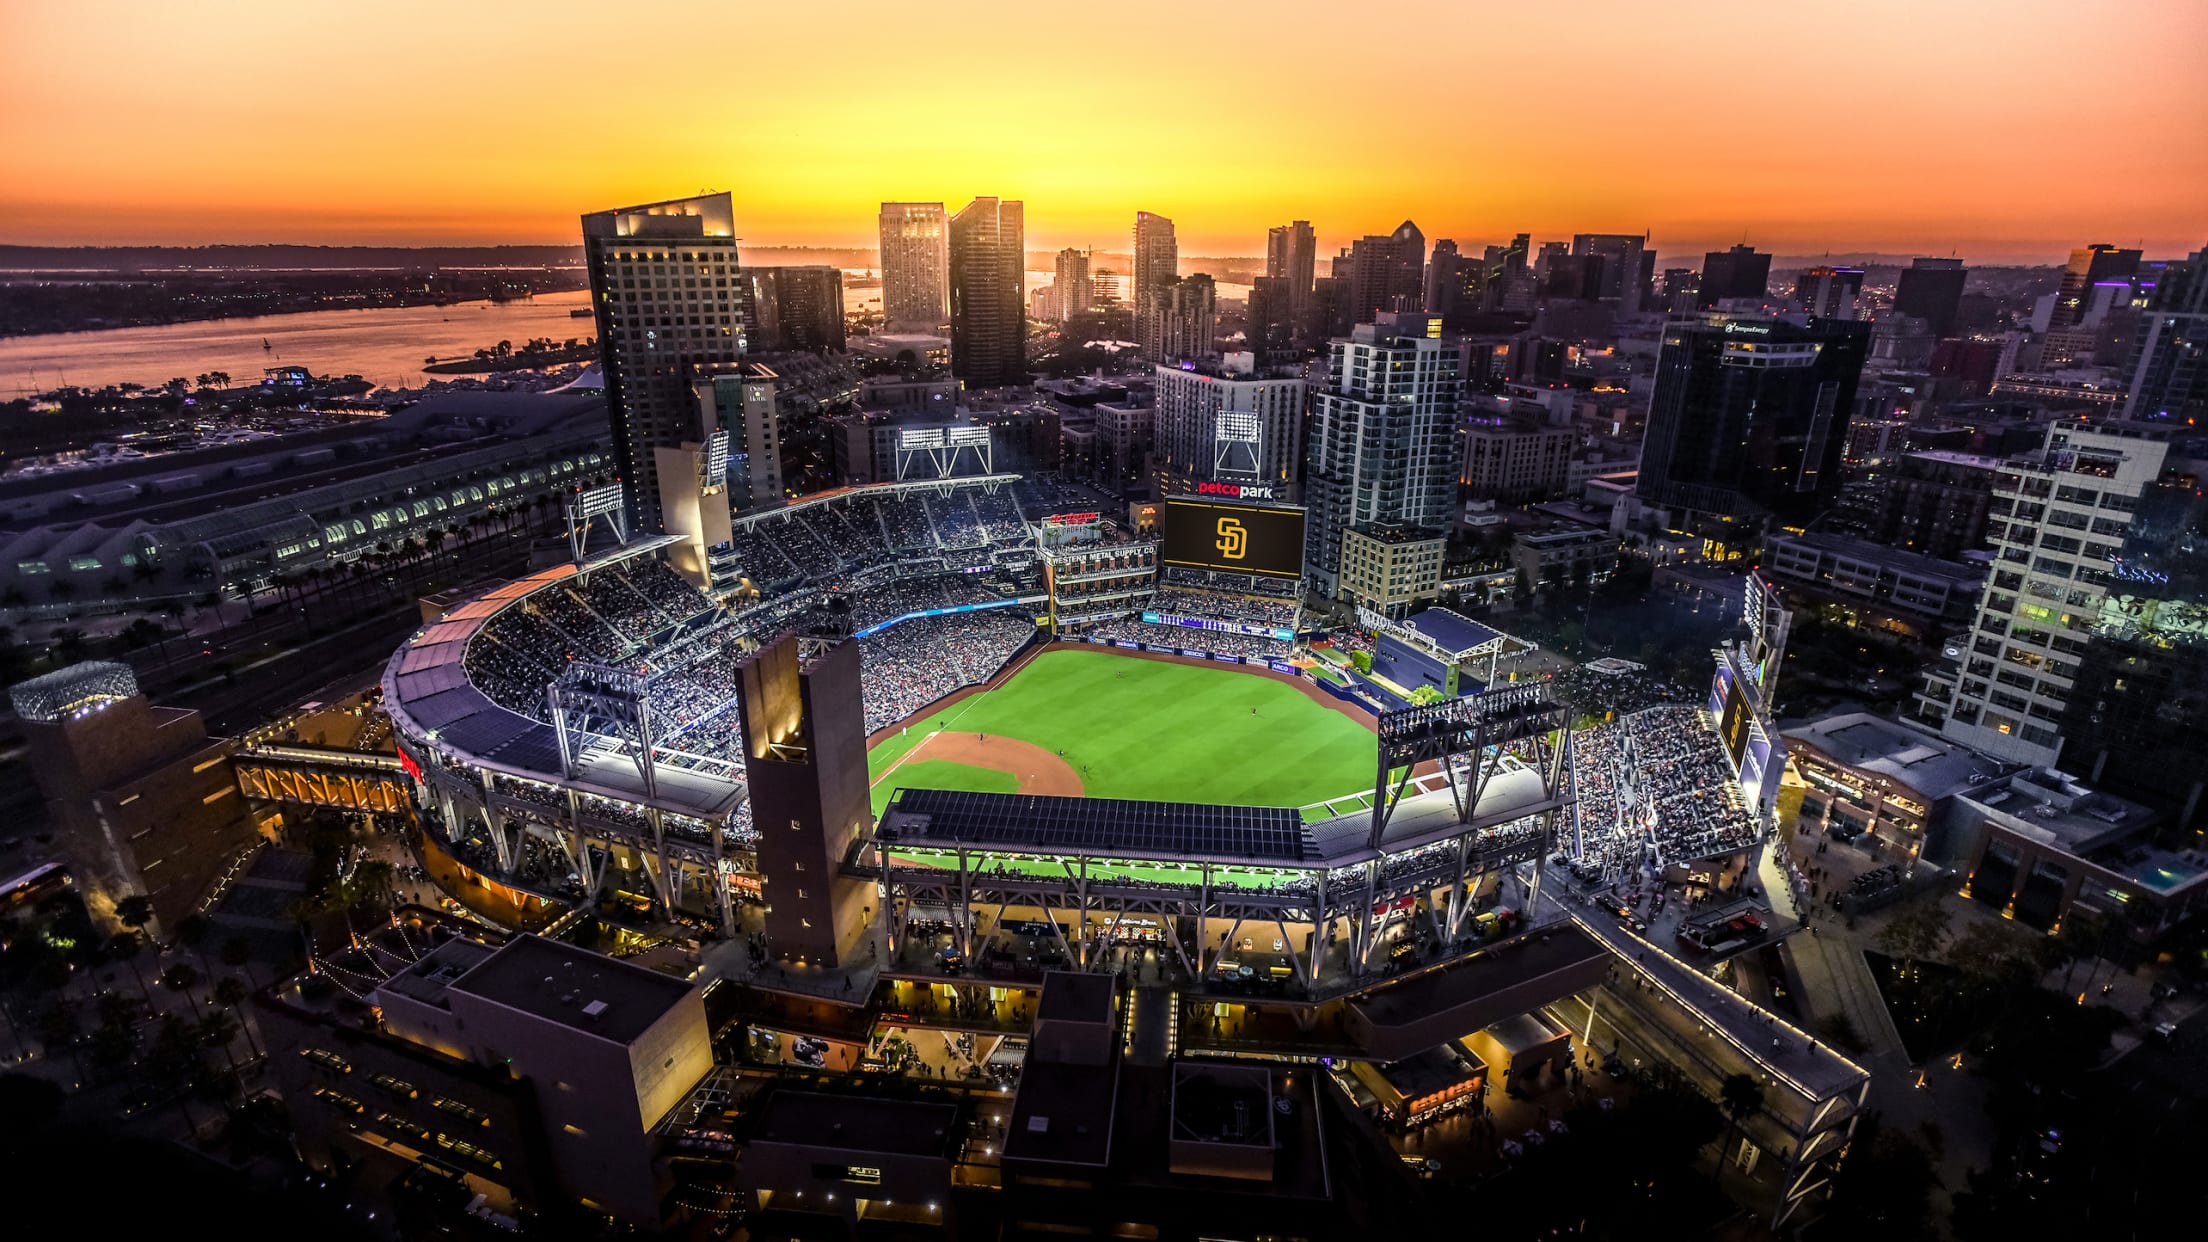 Ticketmaster lands deal with Padres for Petco Park, Sycuan Stage